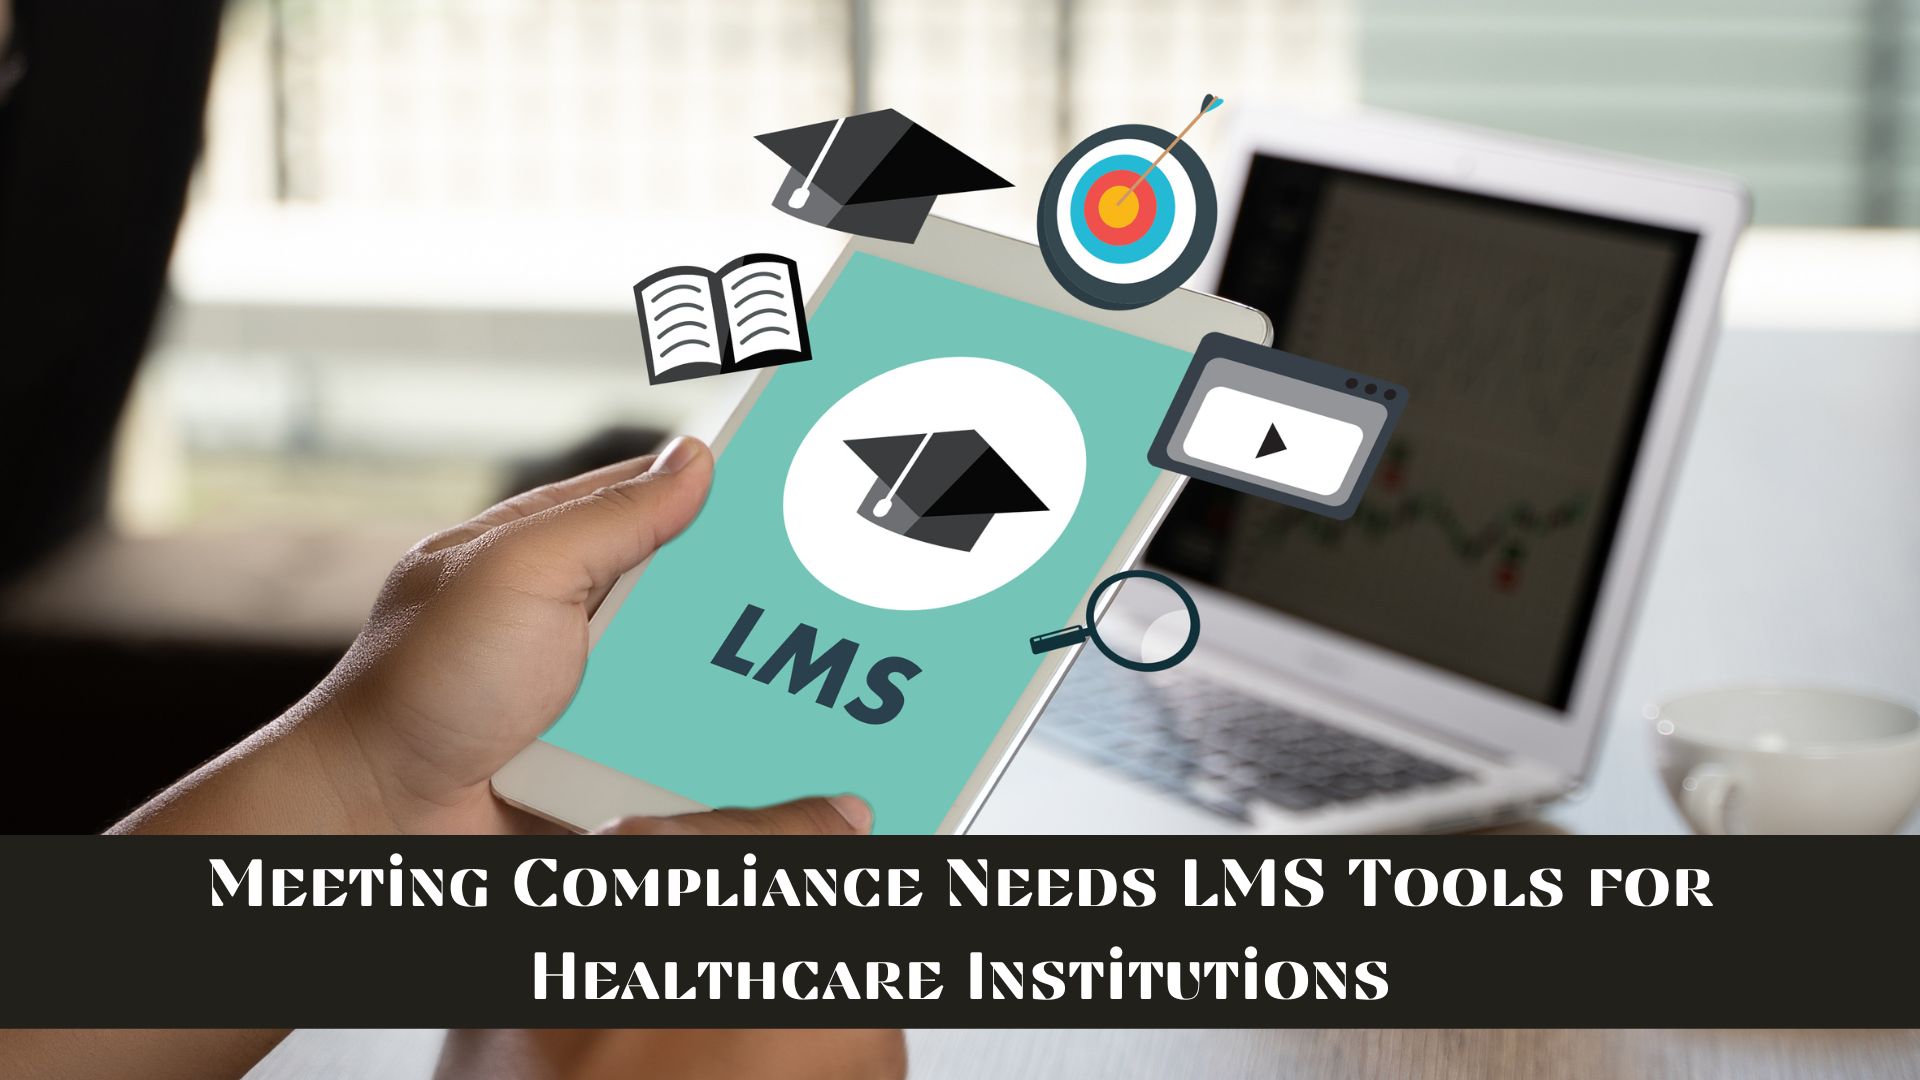 Meeting Compliance Needs: LMS Tools for Healthcare Institutions